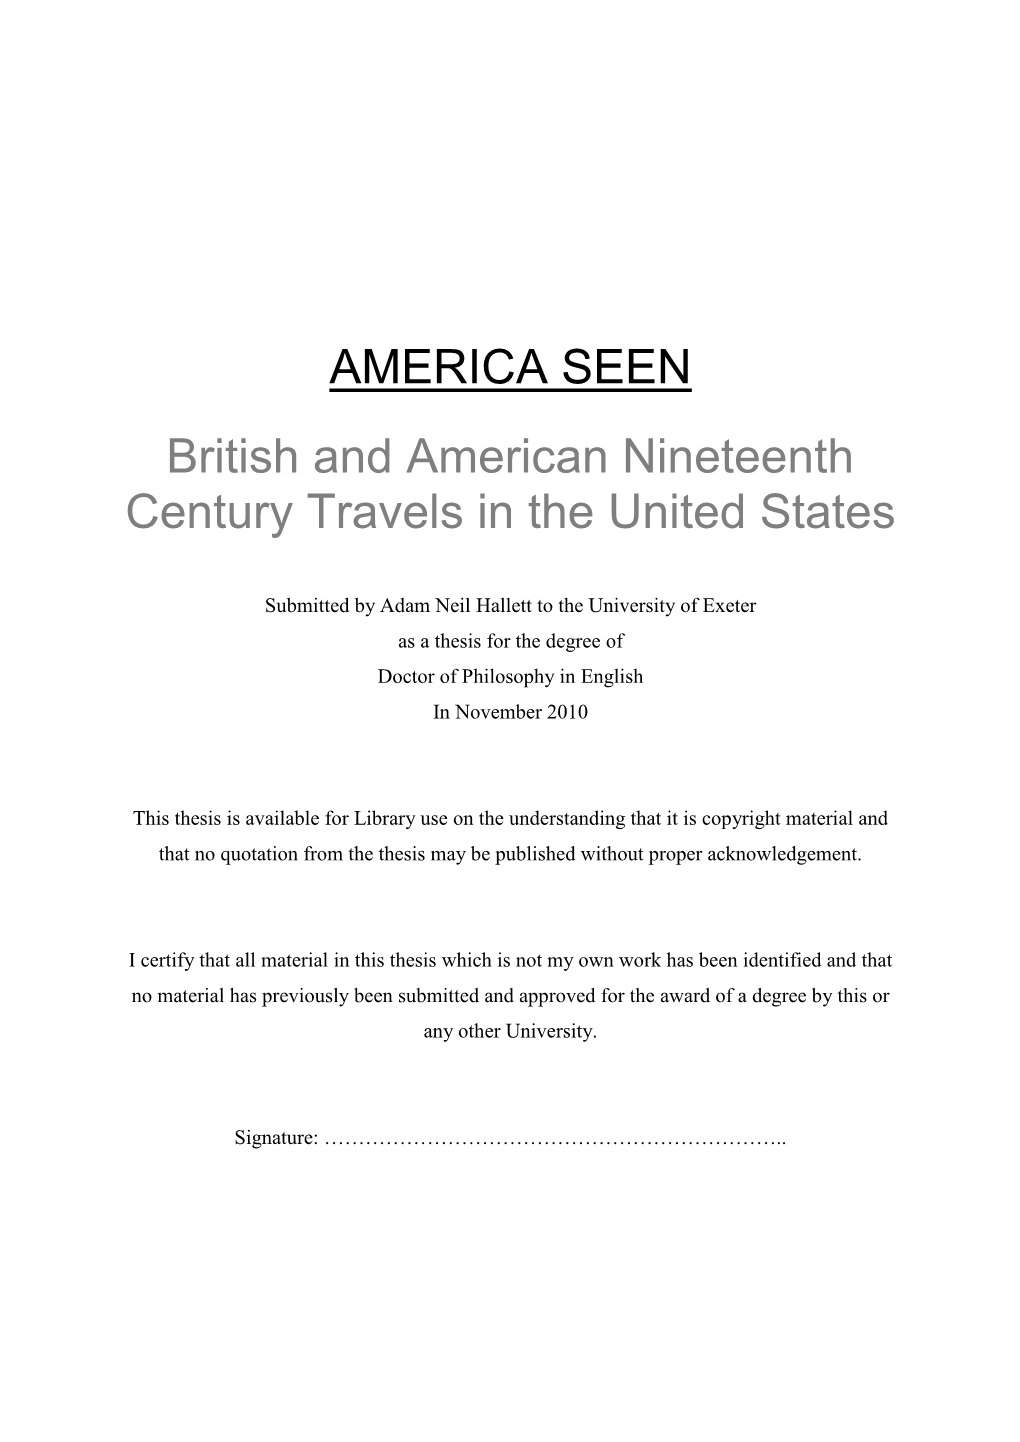 AMERICA SEEN British and American Nineteenth Century Travels in the United States